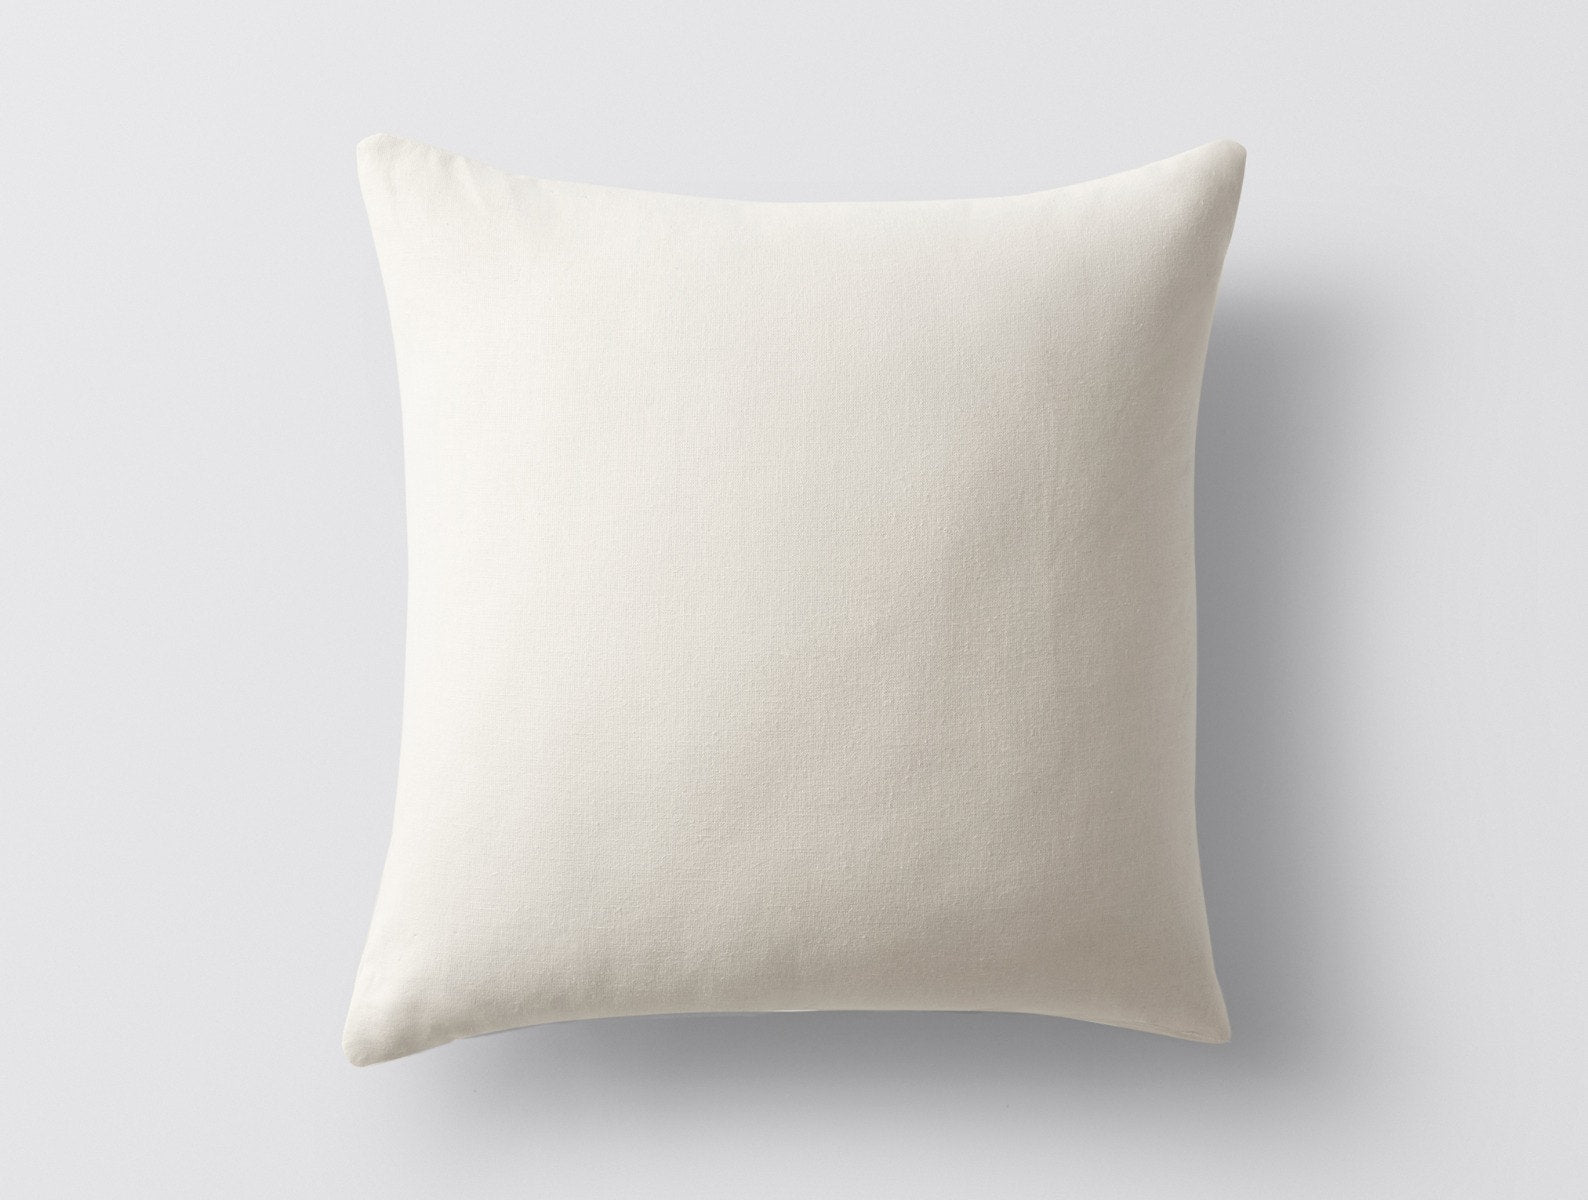 Decorative Feather Down Throw Pillow Inserts with Cotton Cover